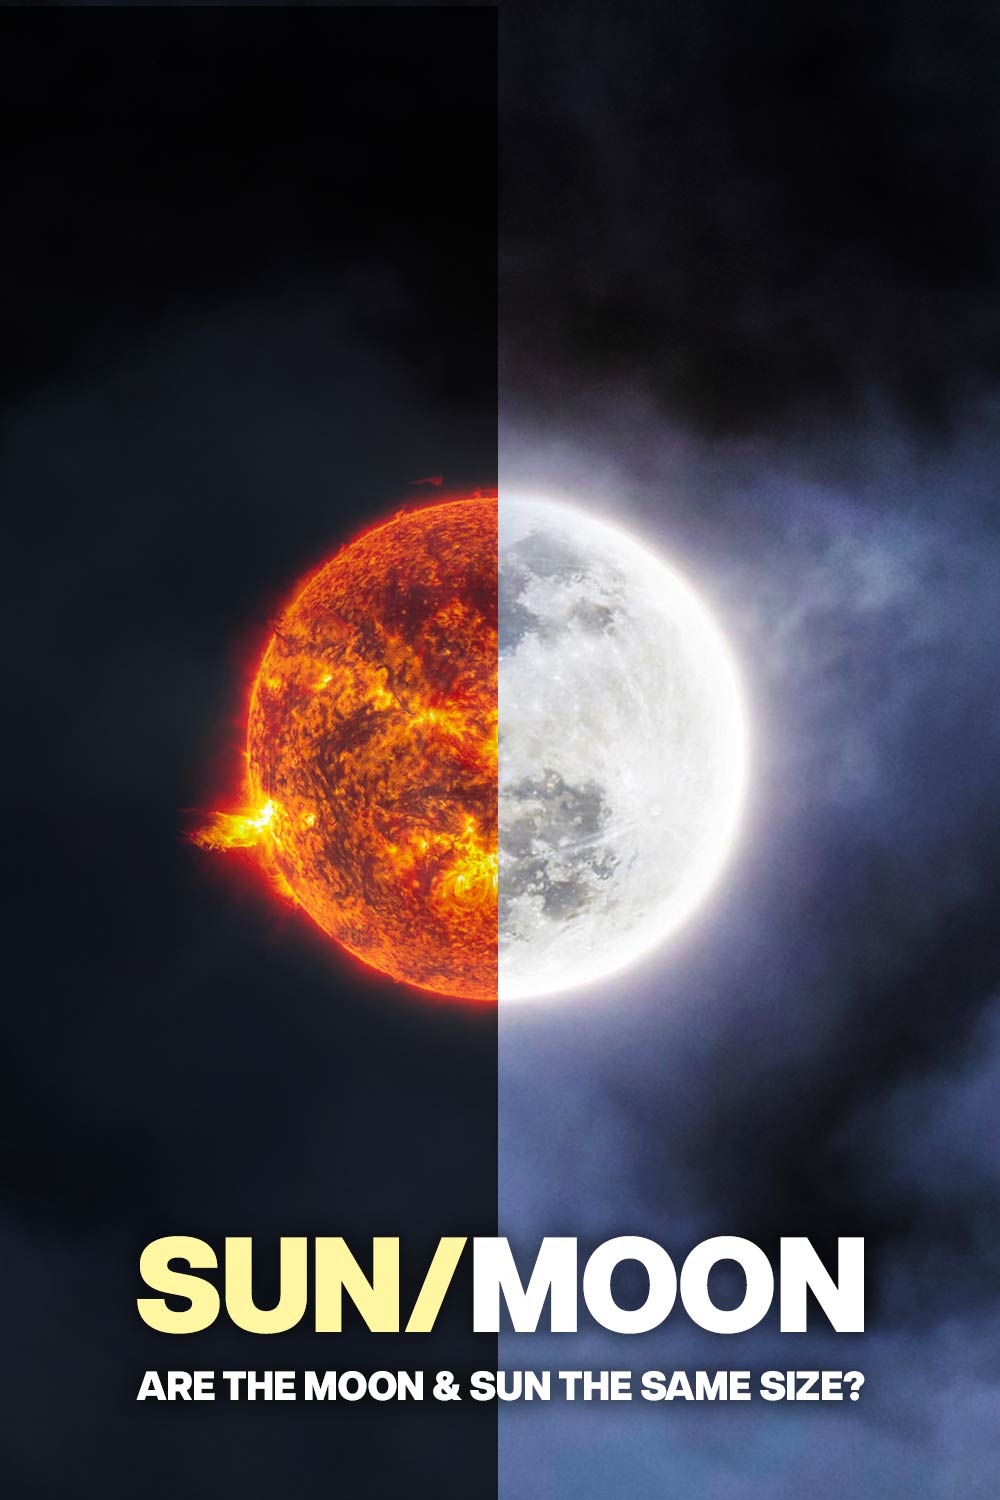 Why do the sun and moon appear the same size?